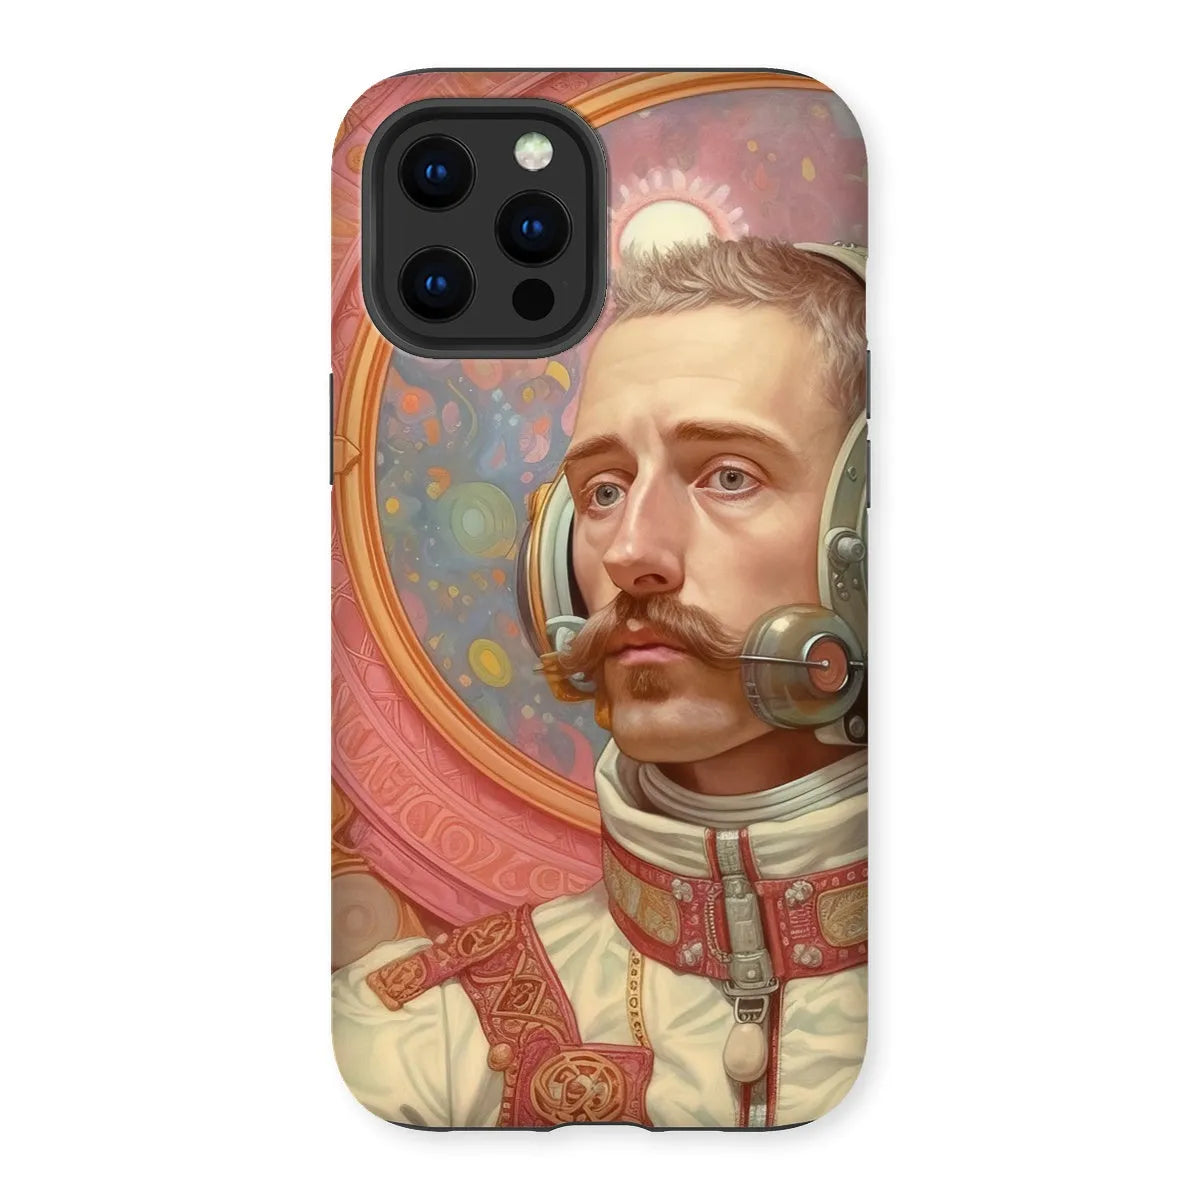 Axel - Gay German Astronaut Aesthetic Art Phone Case - Iphone 12 Pro Max / Matte - Mobile Phone Cases - Aesthetic Art